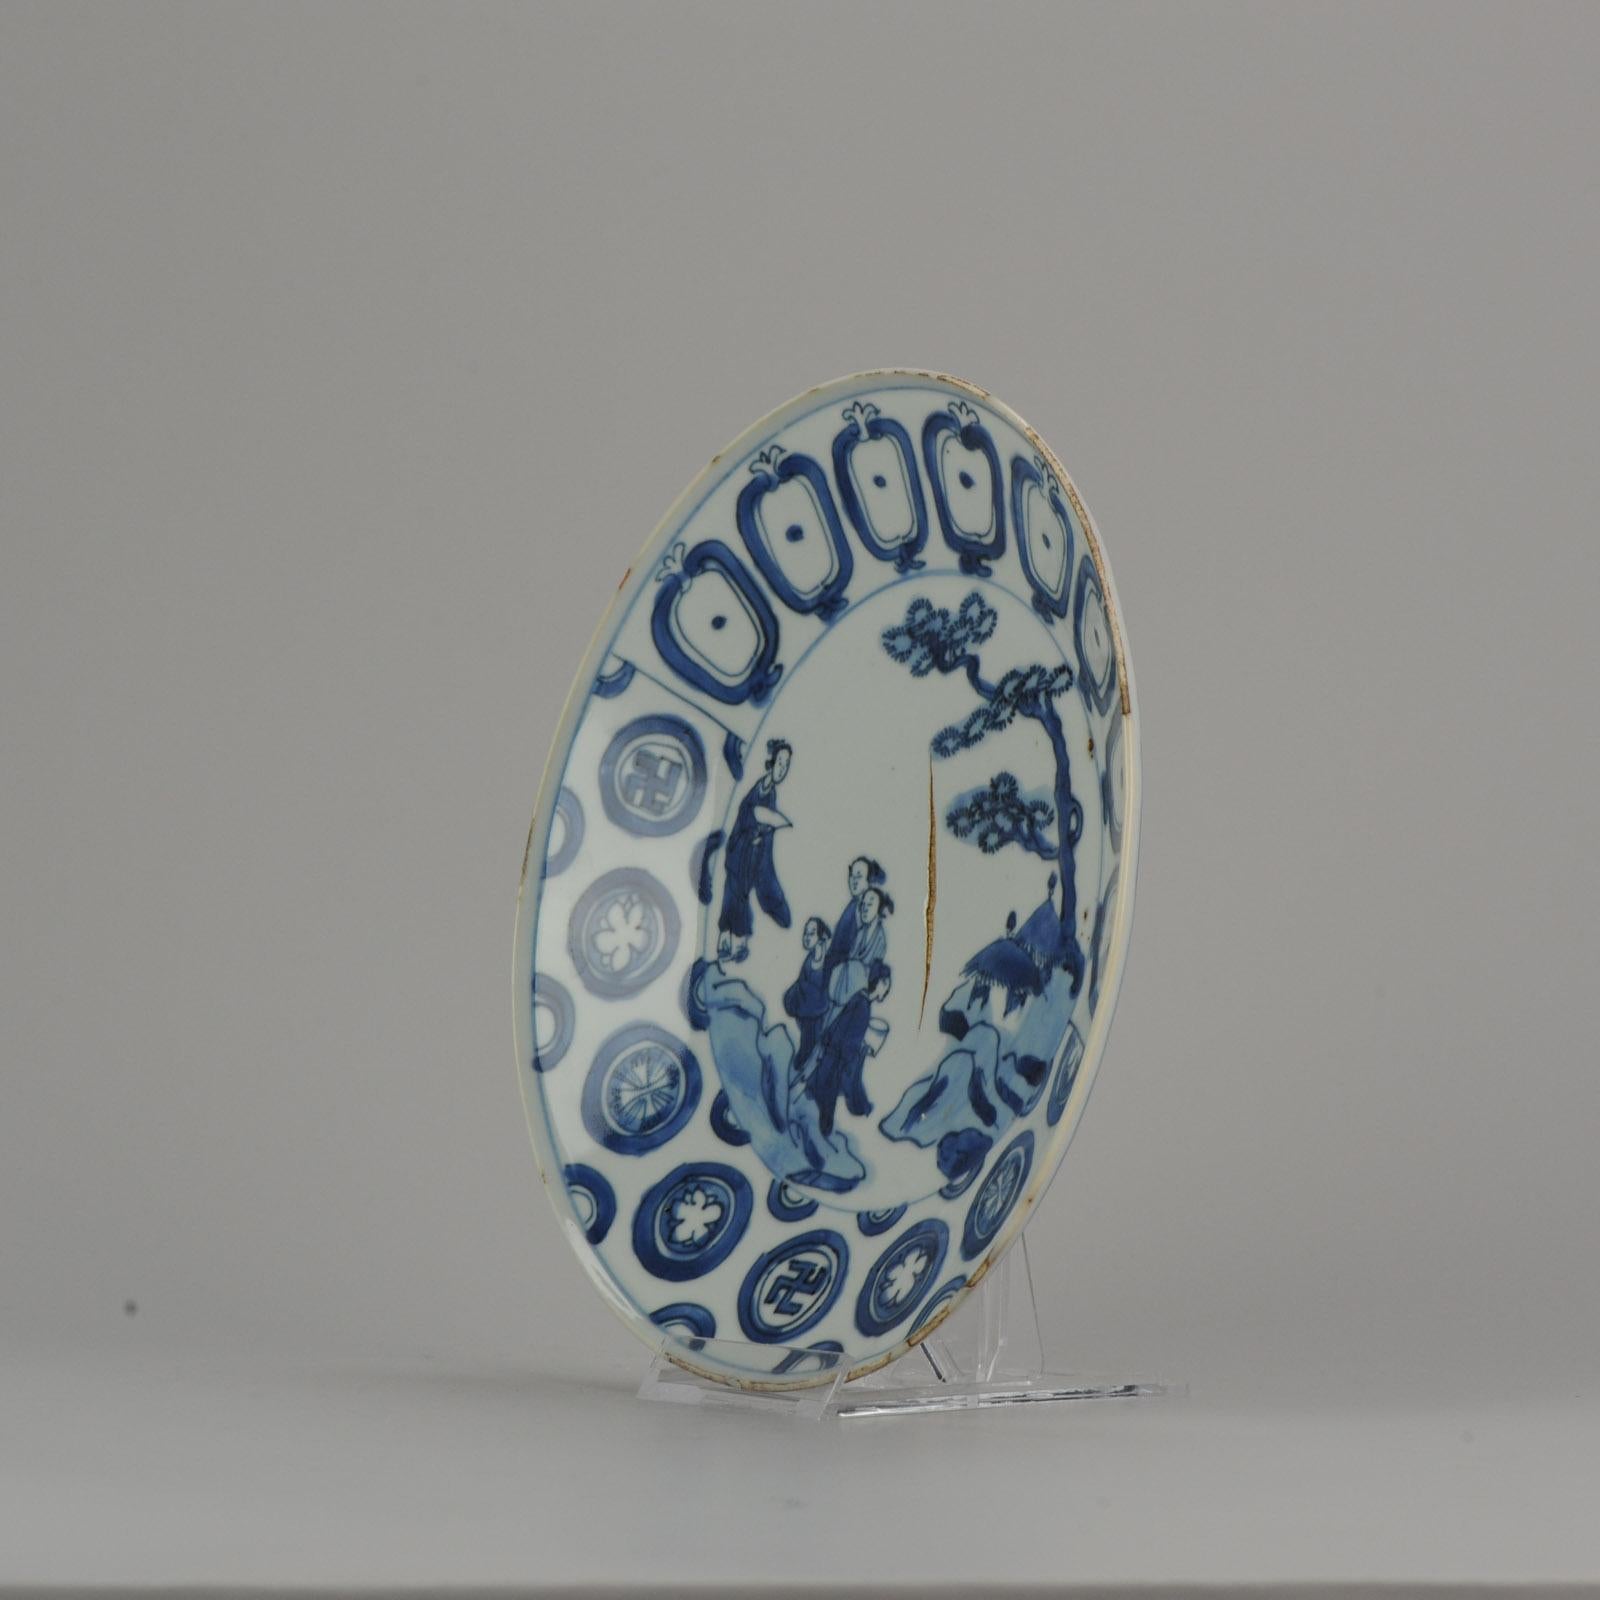 A very nicely decorated plate with a scene figures in a landscape

10-8-19-1-6
Condition
/ Overall Condition. Rimfritting, only. 206mm
Period
17th century Ming (1368 - 1620)